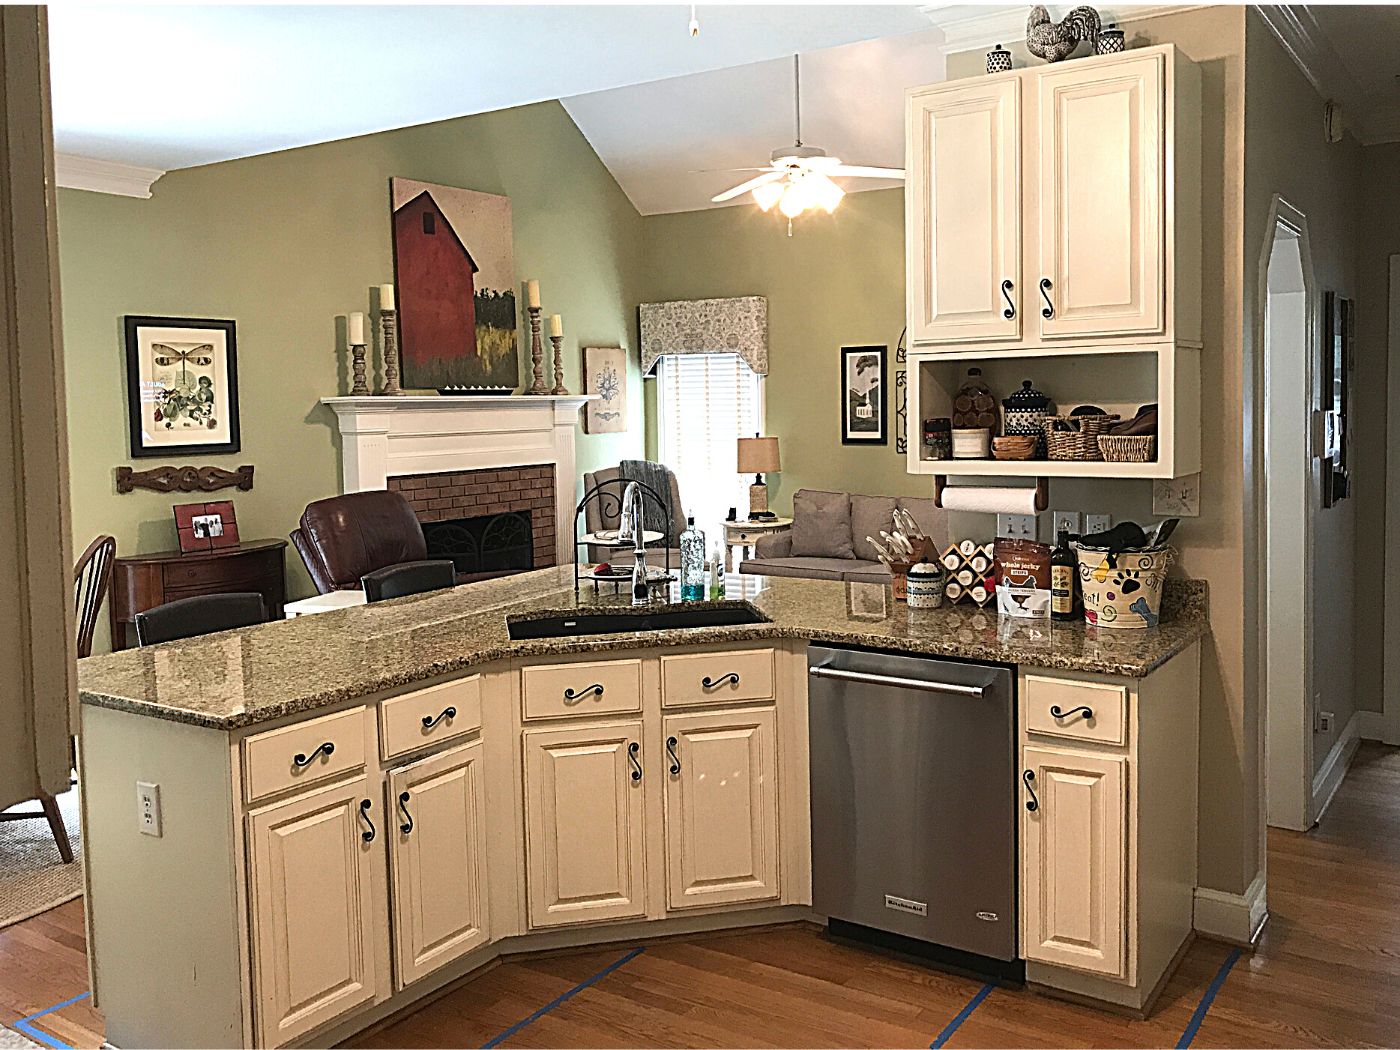 Old Kitchen L-Shaped Peninsula with Granite Countertop, Blanco Silgranite Black Sink and Soffit Space above Cabinets 9 foot ceiling